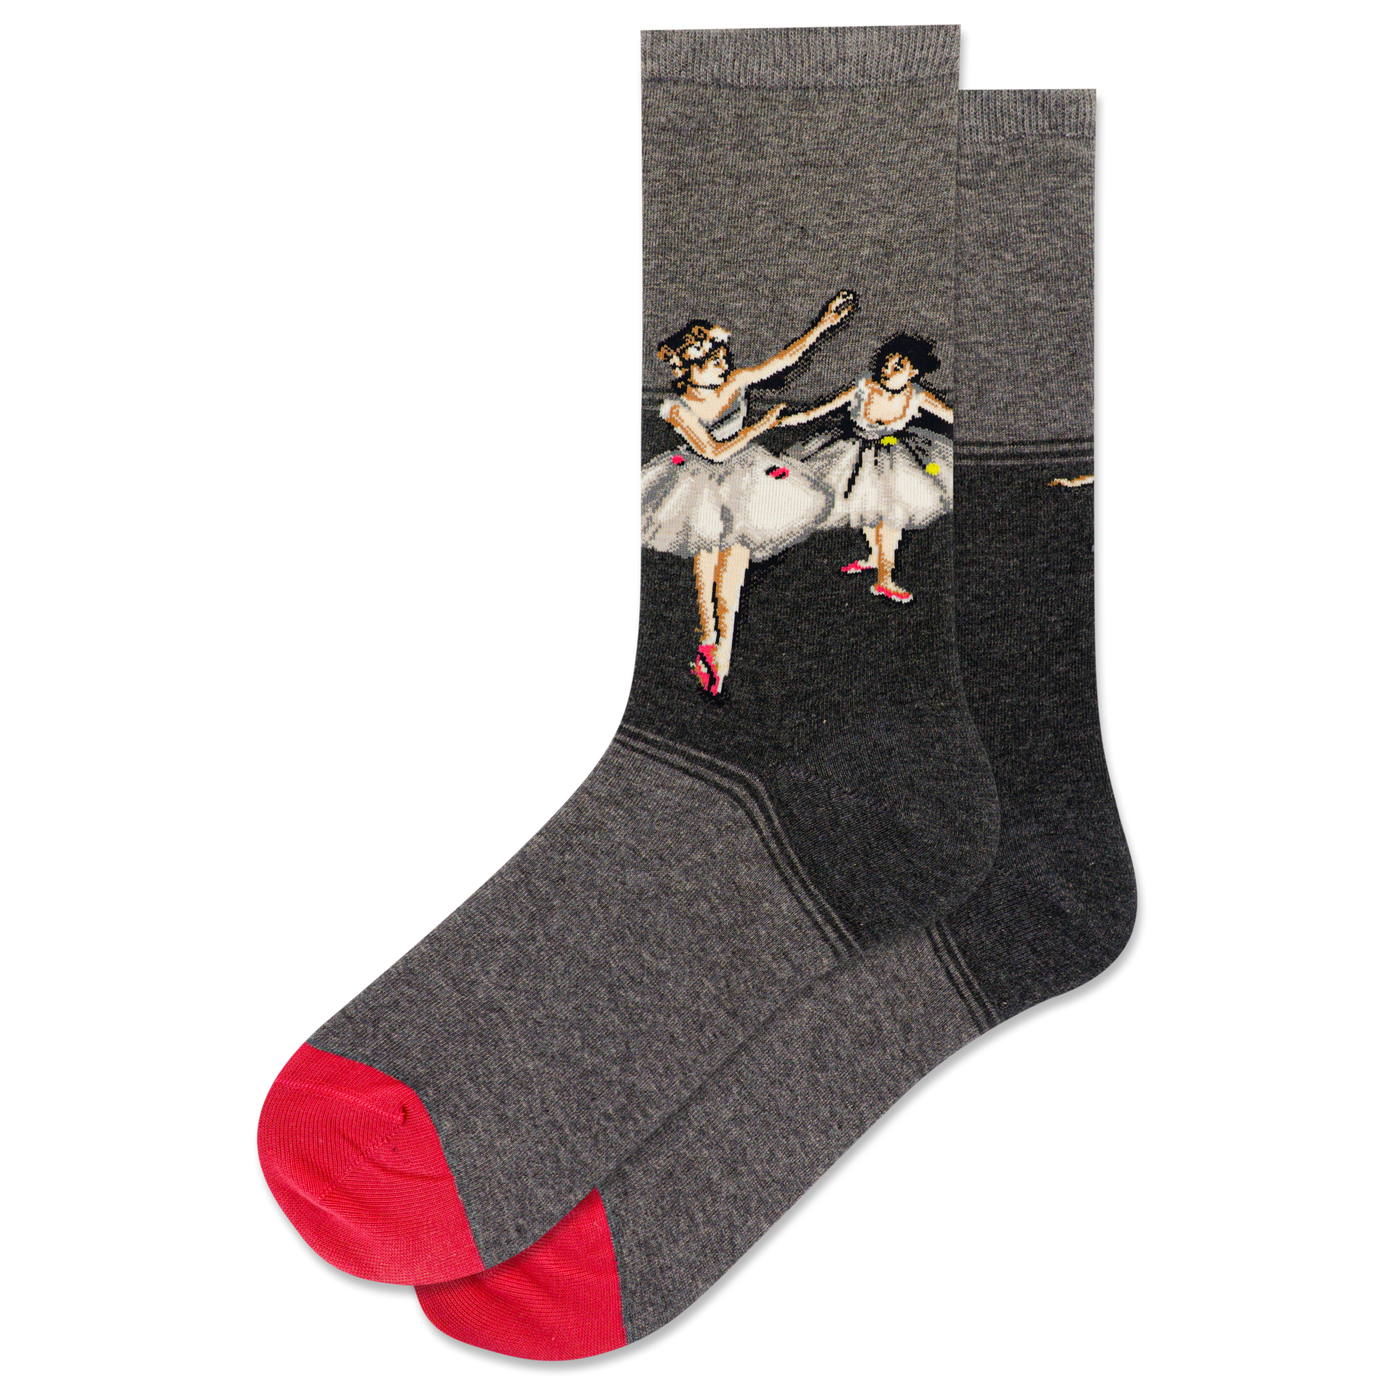 "Two Dancers On Stage" Cotton Crew Socks by Hot Sox - Medium